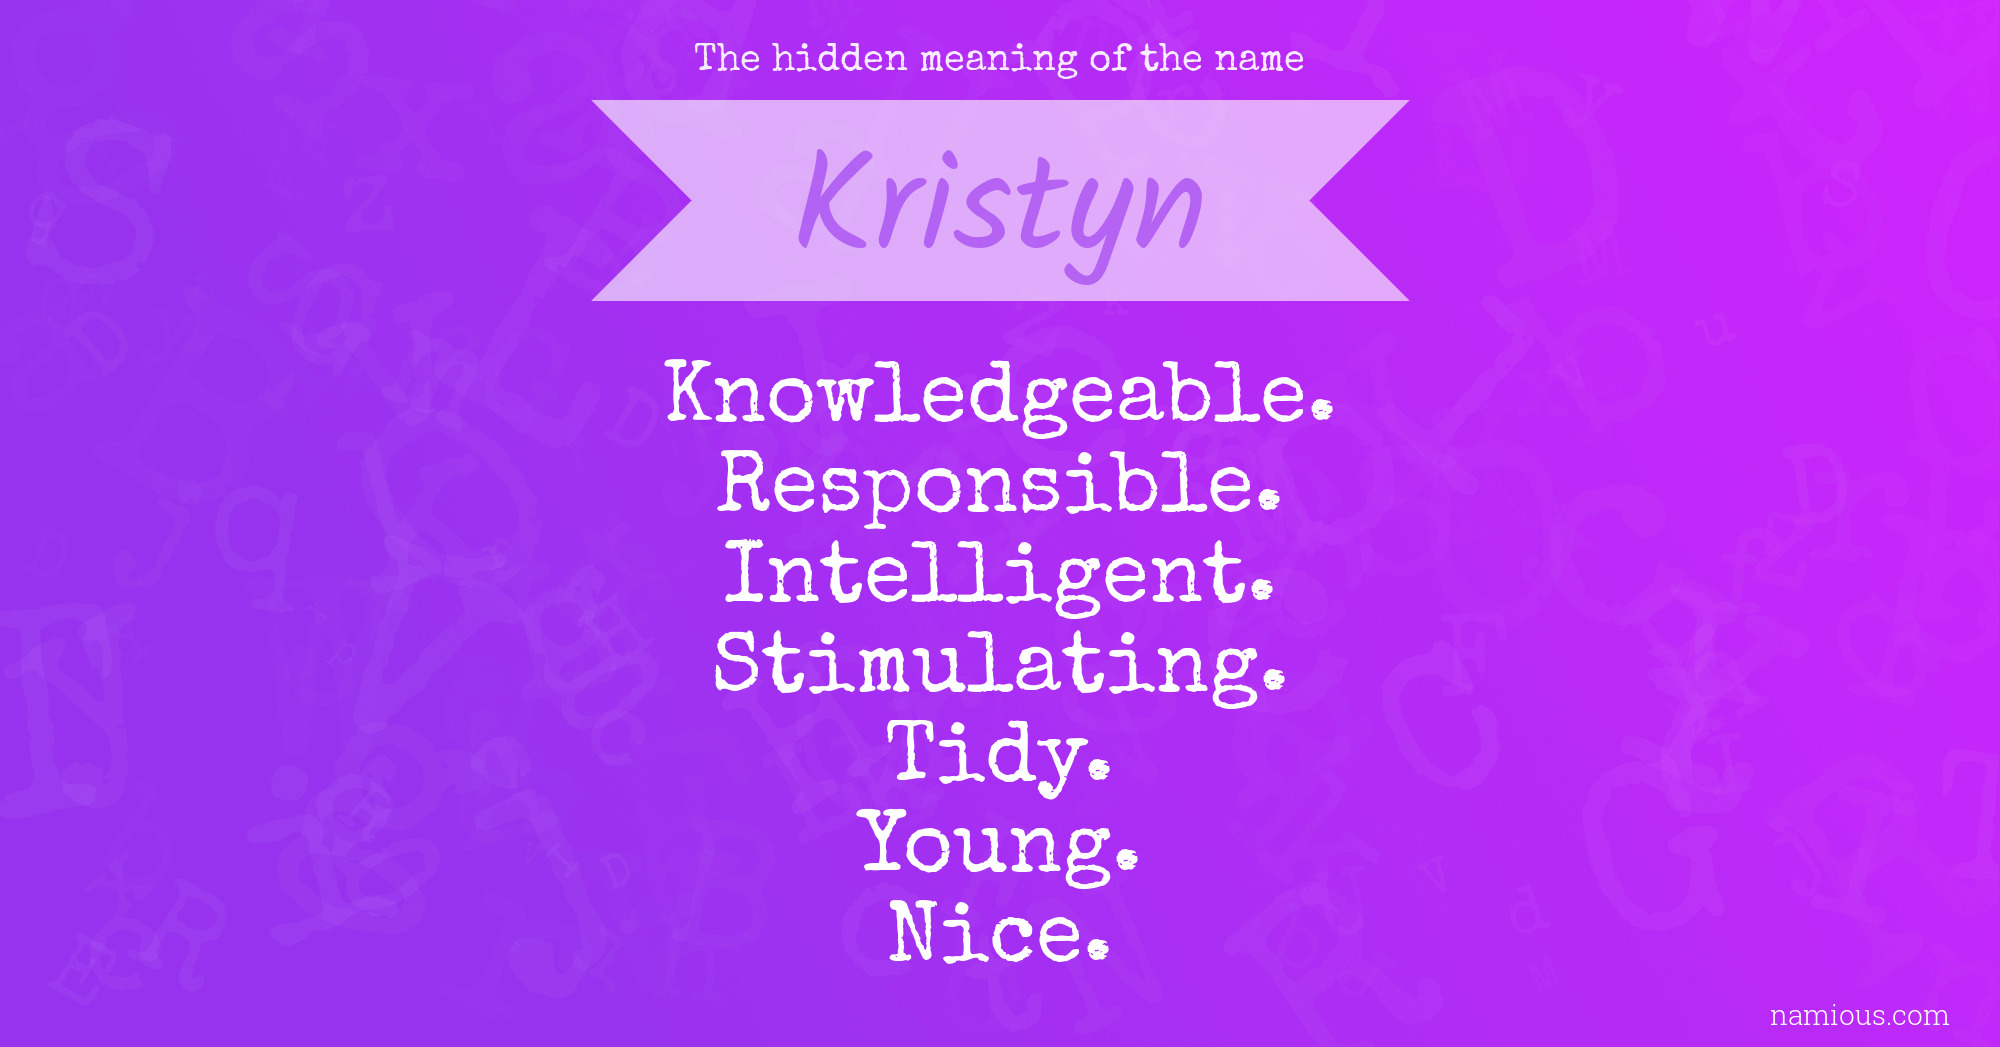 The hidden meaning of the name Kristyn